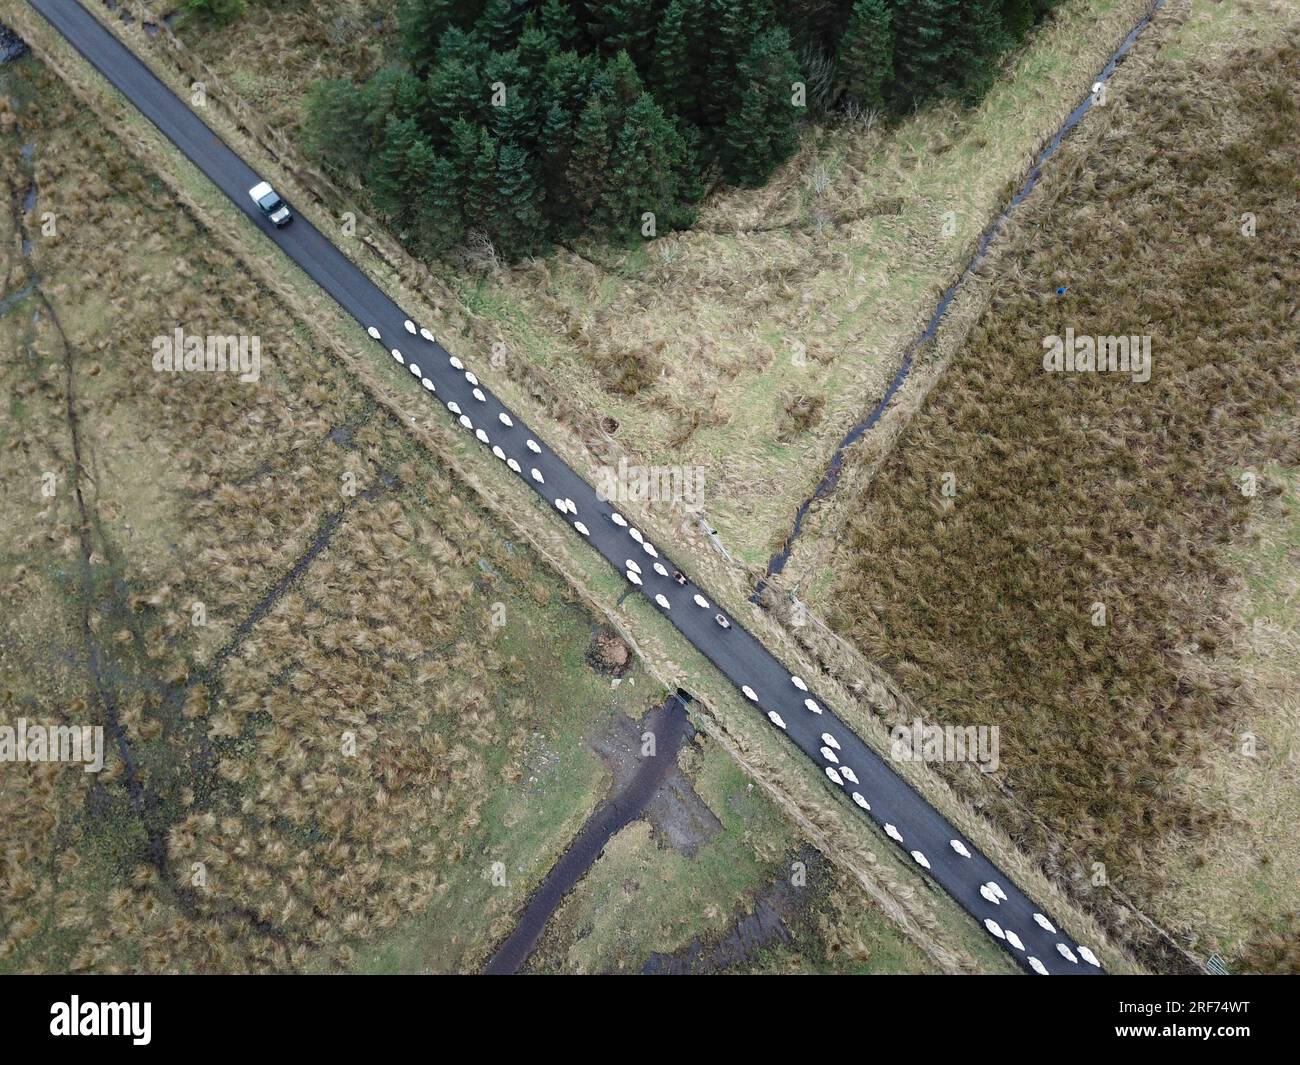 Sheep on road in lines,  lines of sheep Stock Photo